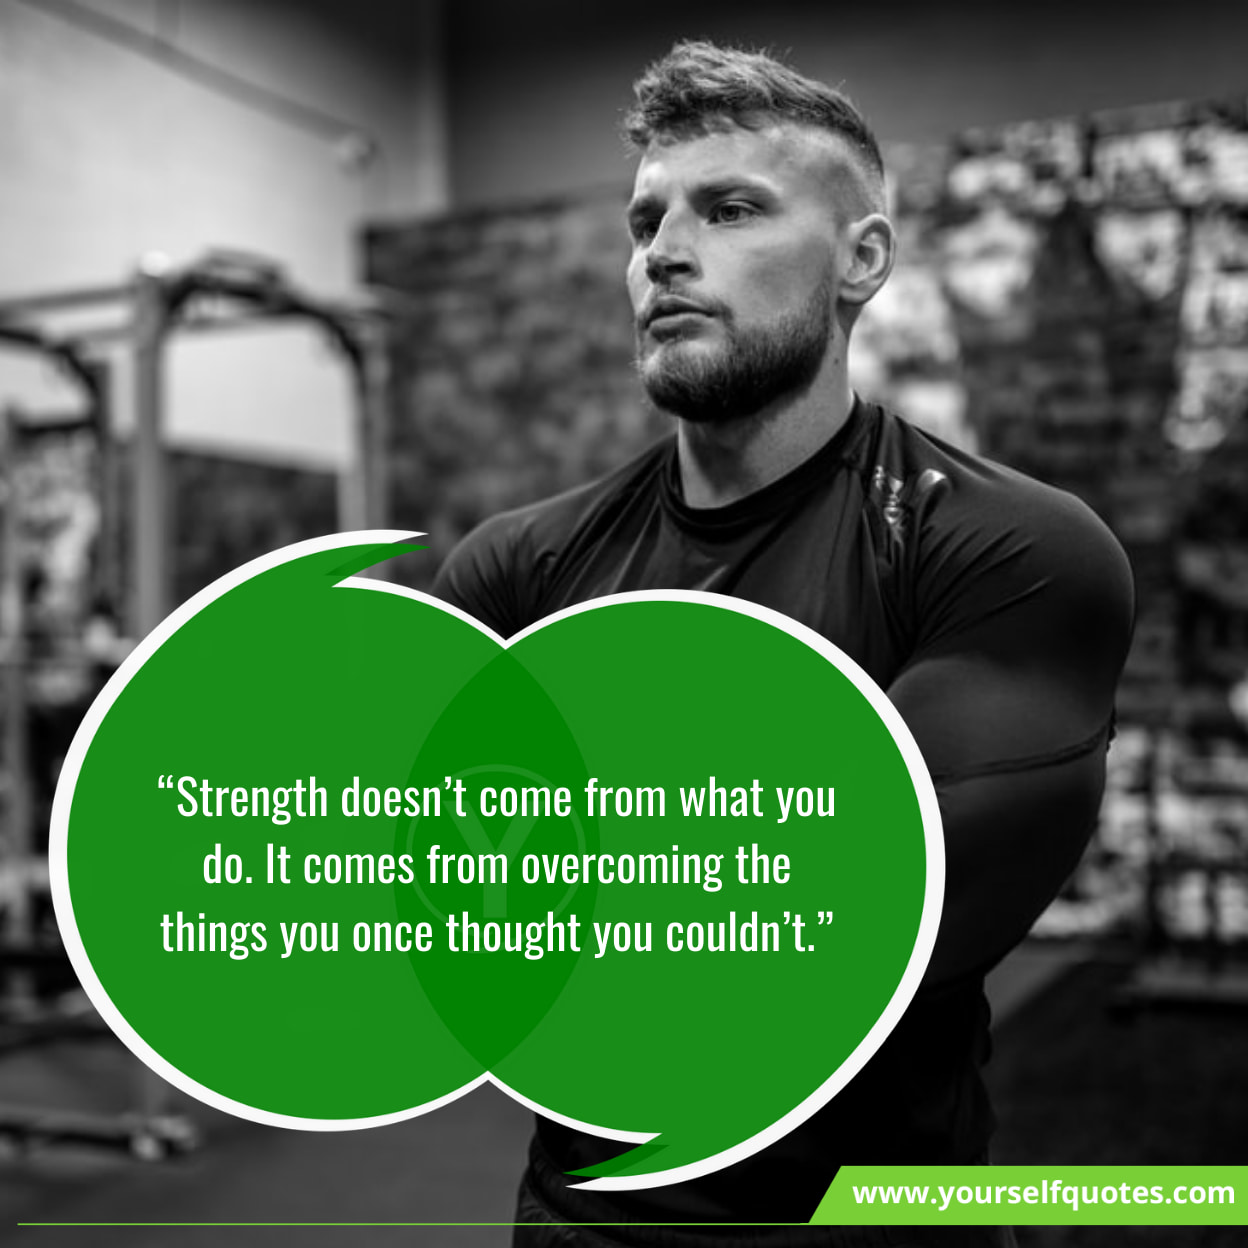 Inspiring Quotes On Strength